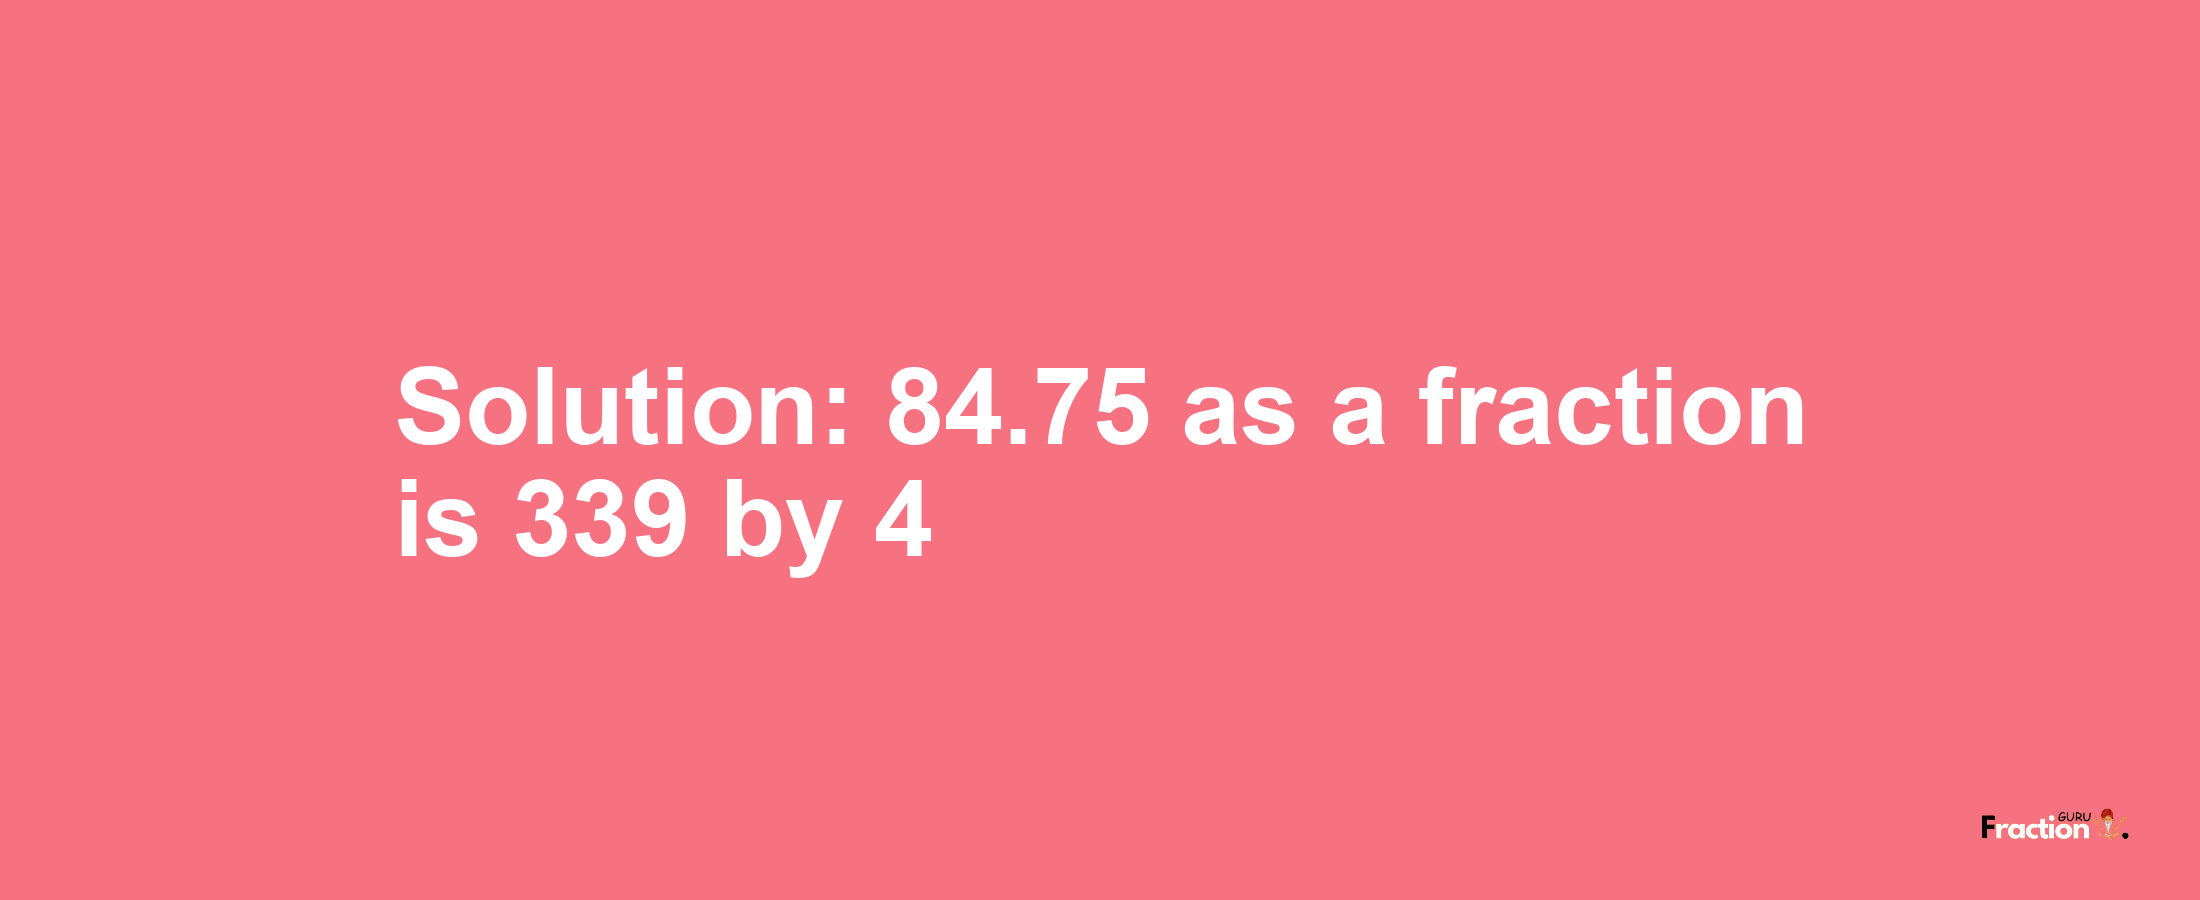 Solution:84.75 as a fraction is 339/4